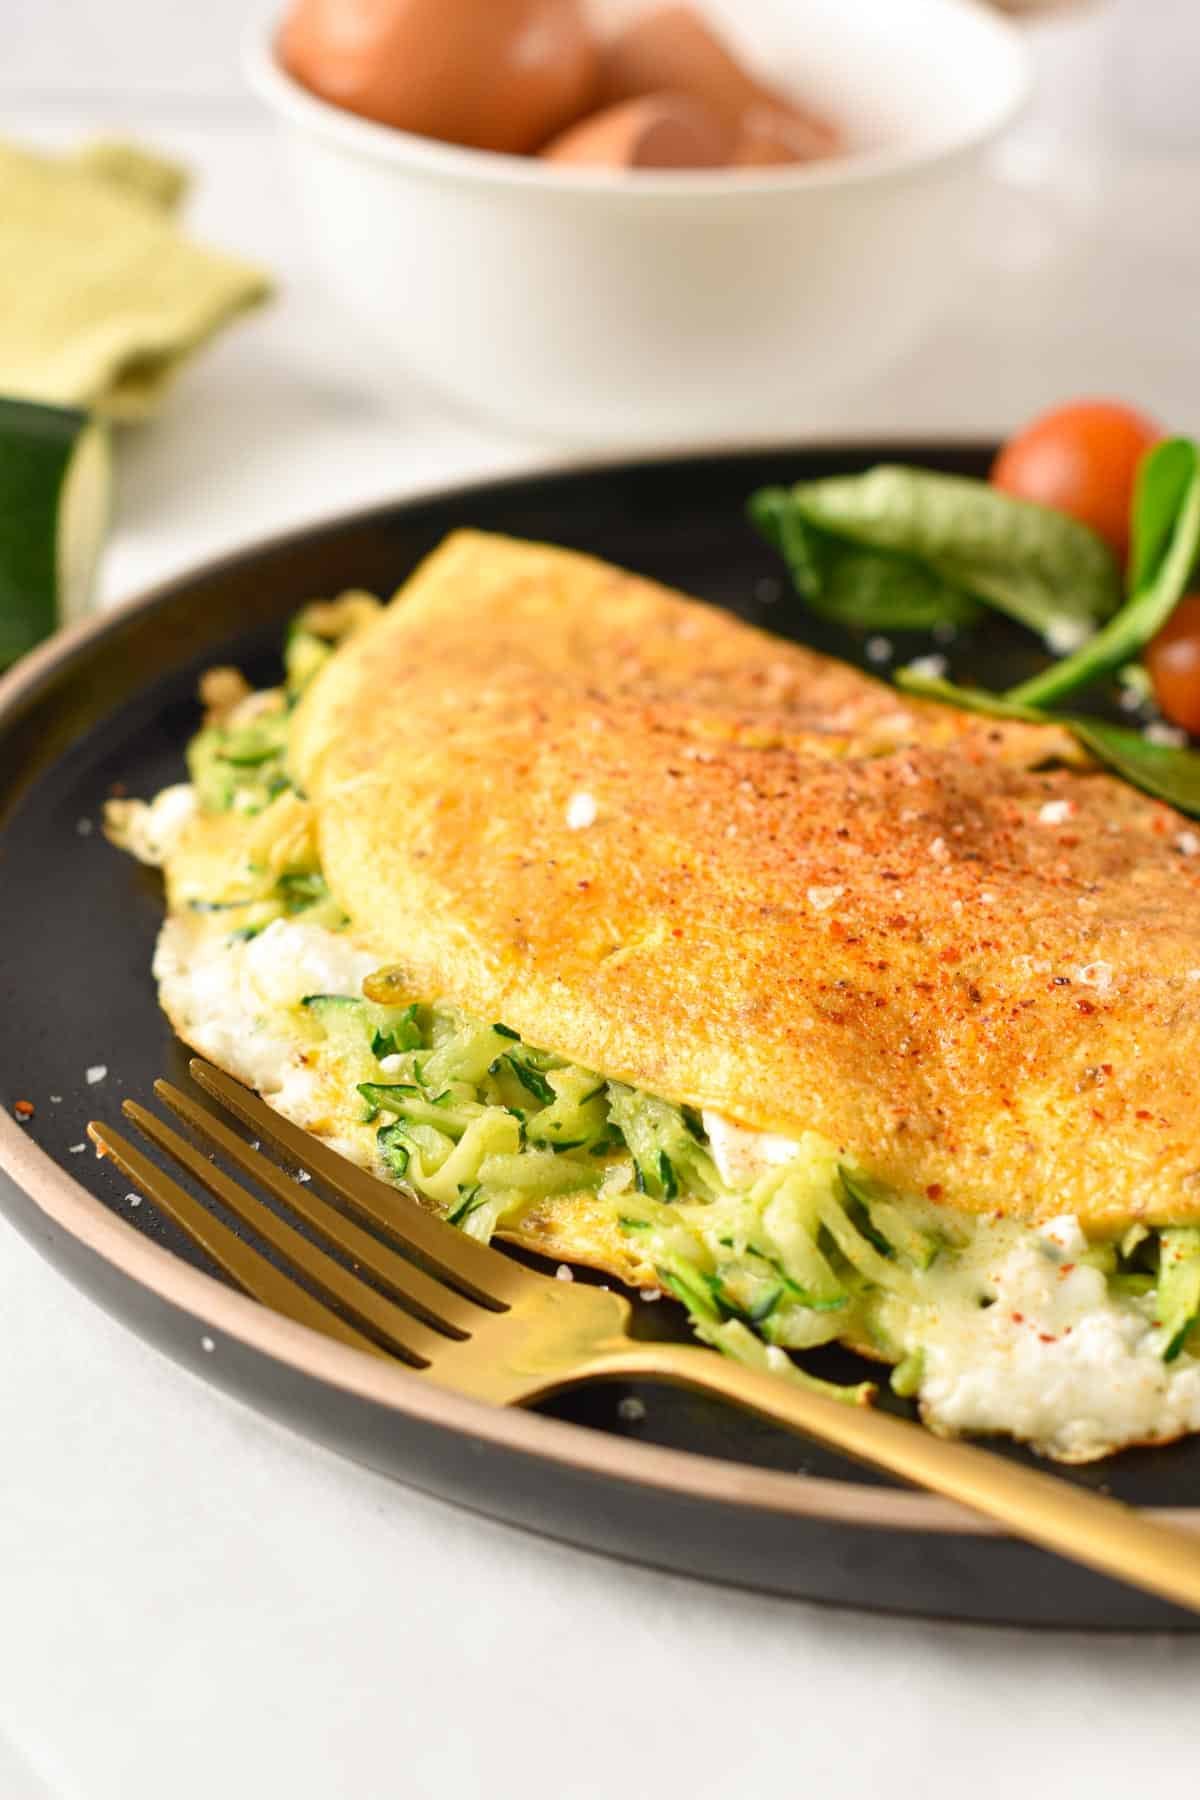 An omelette filled with grated zucchini and cheese.